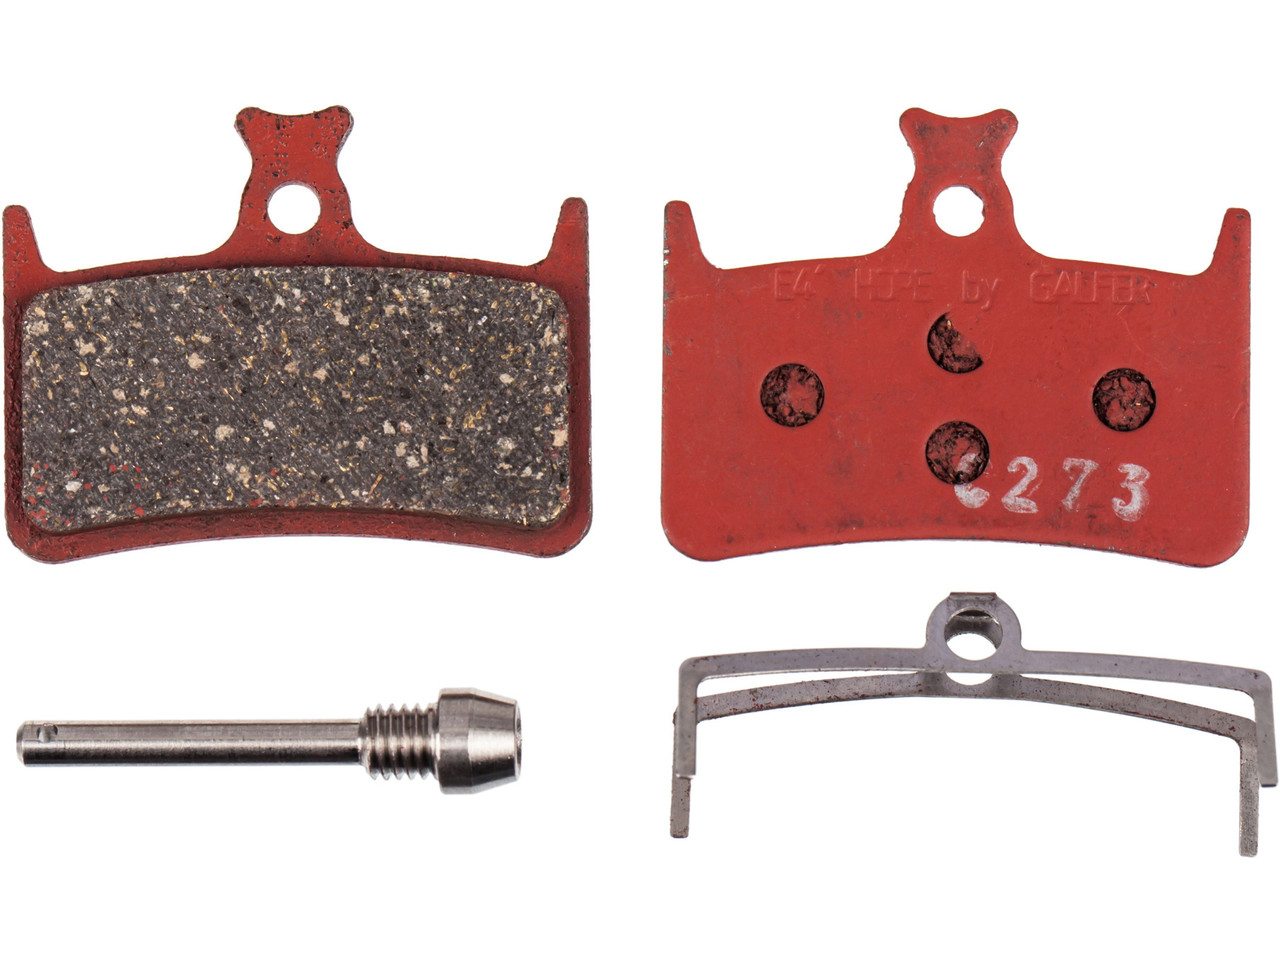 Resin Disc Brake Pads compatible with Hope Tech M4 and Hope Mono M4 